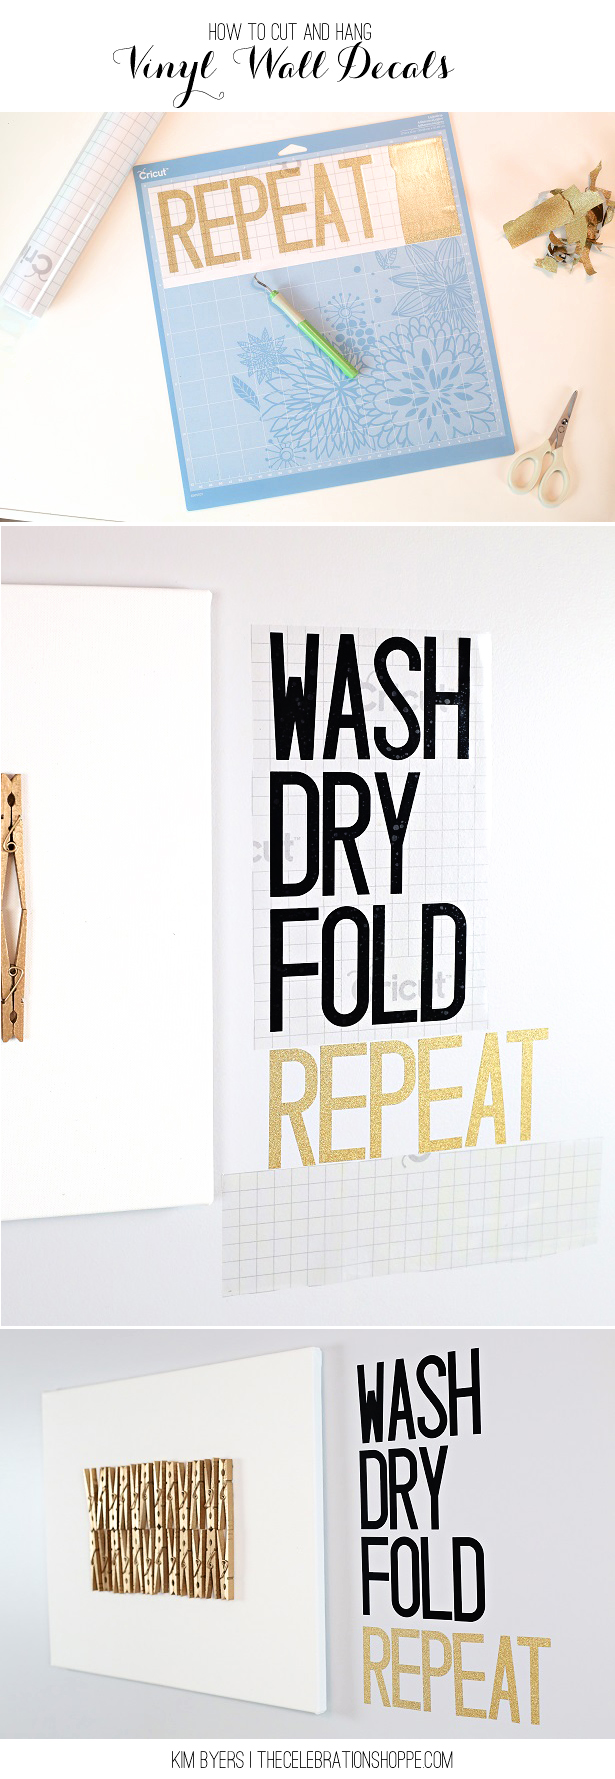 Learn How To Cut and Hang A Vinyl Wall Decal | Kim Byers